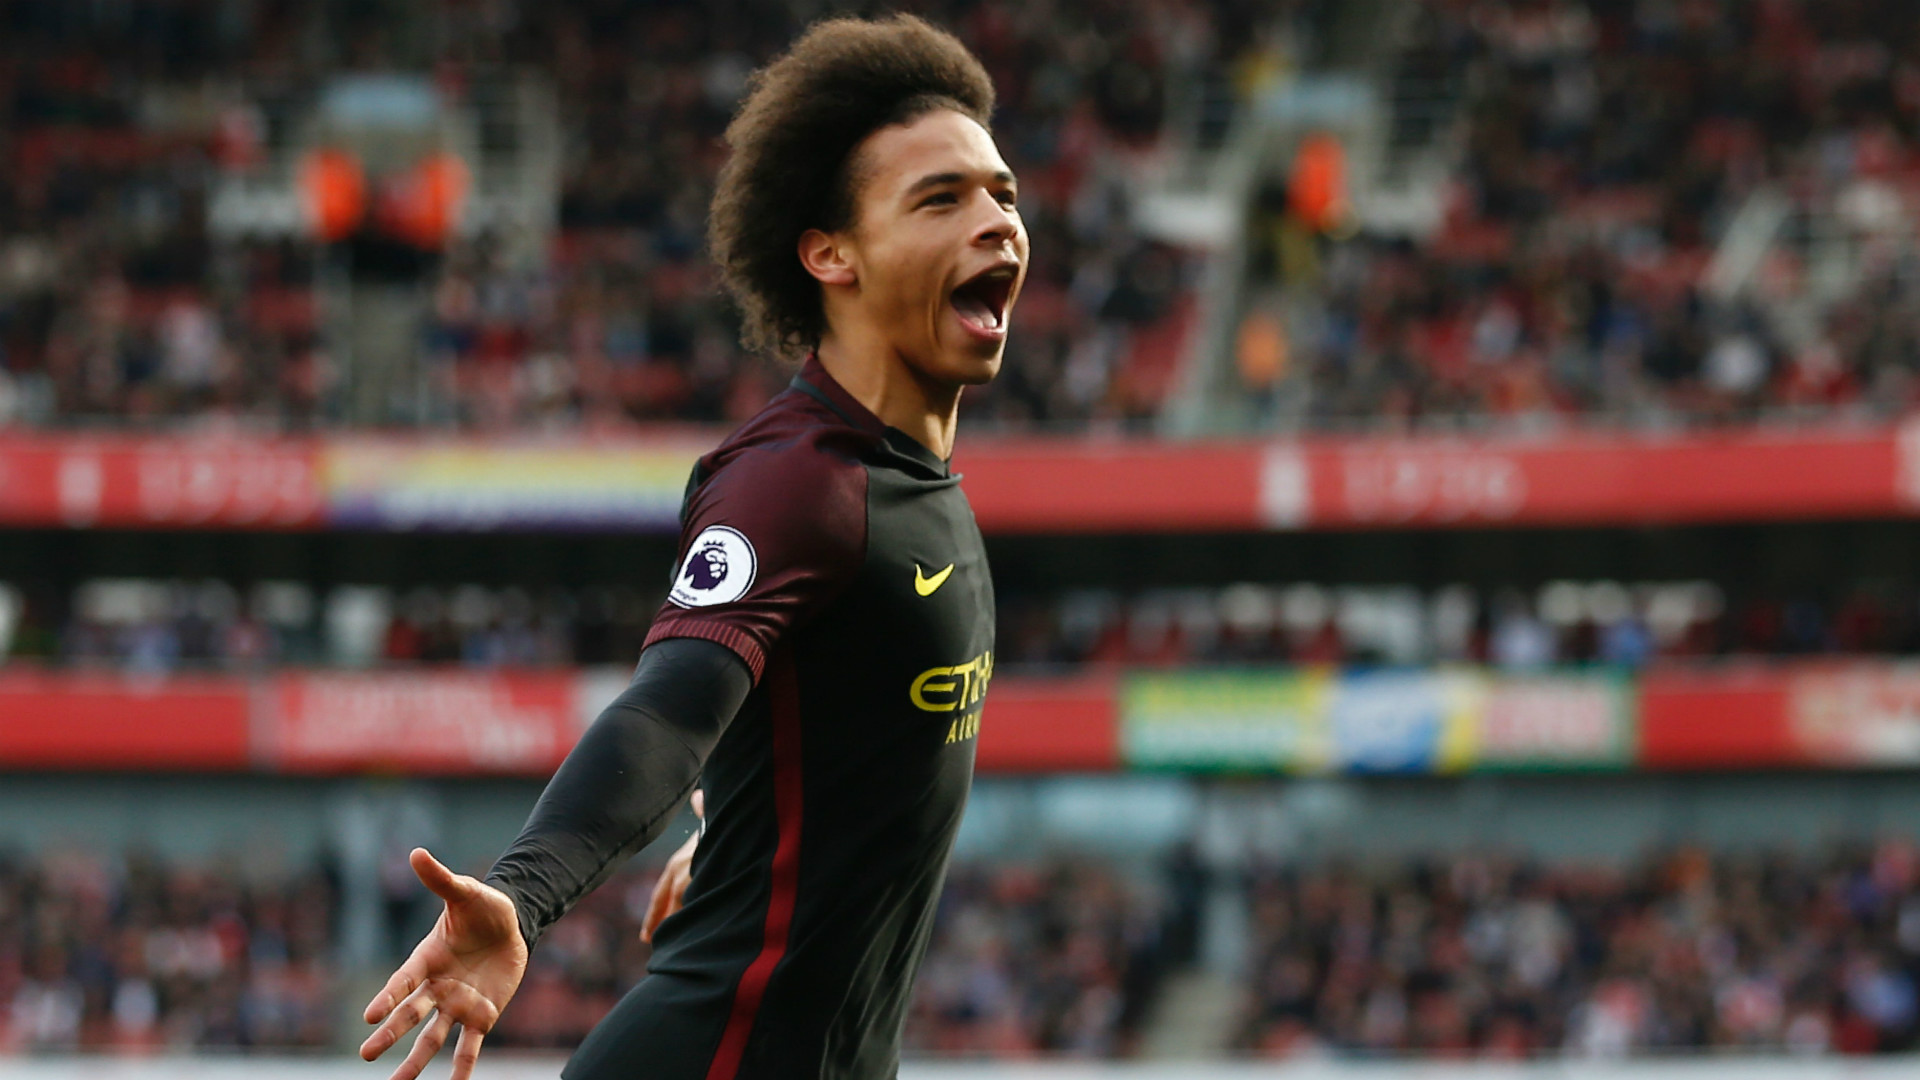 FA Cup: Manchester City's Leroy Sane targeting Arsenal | Goal.com